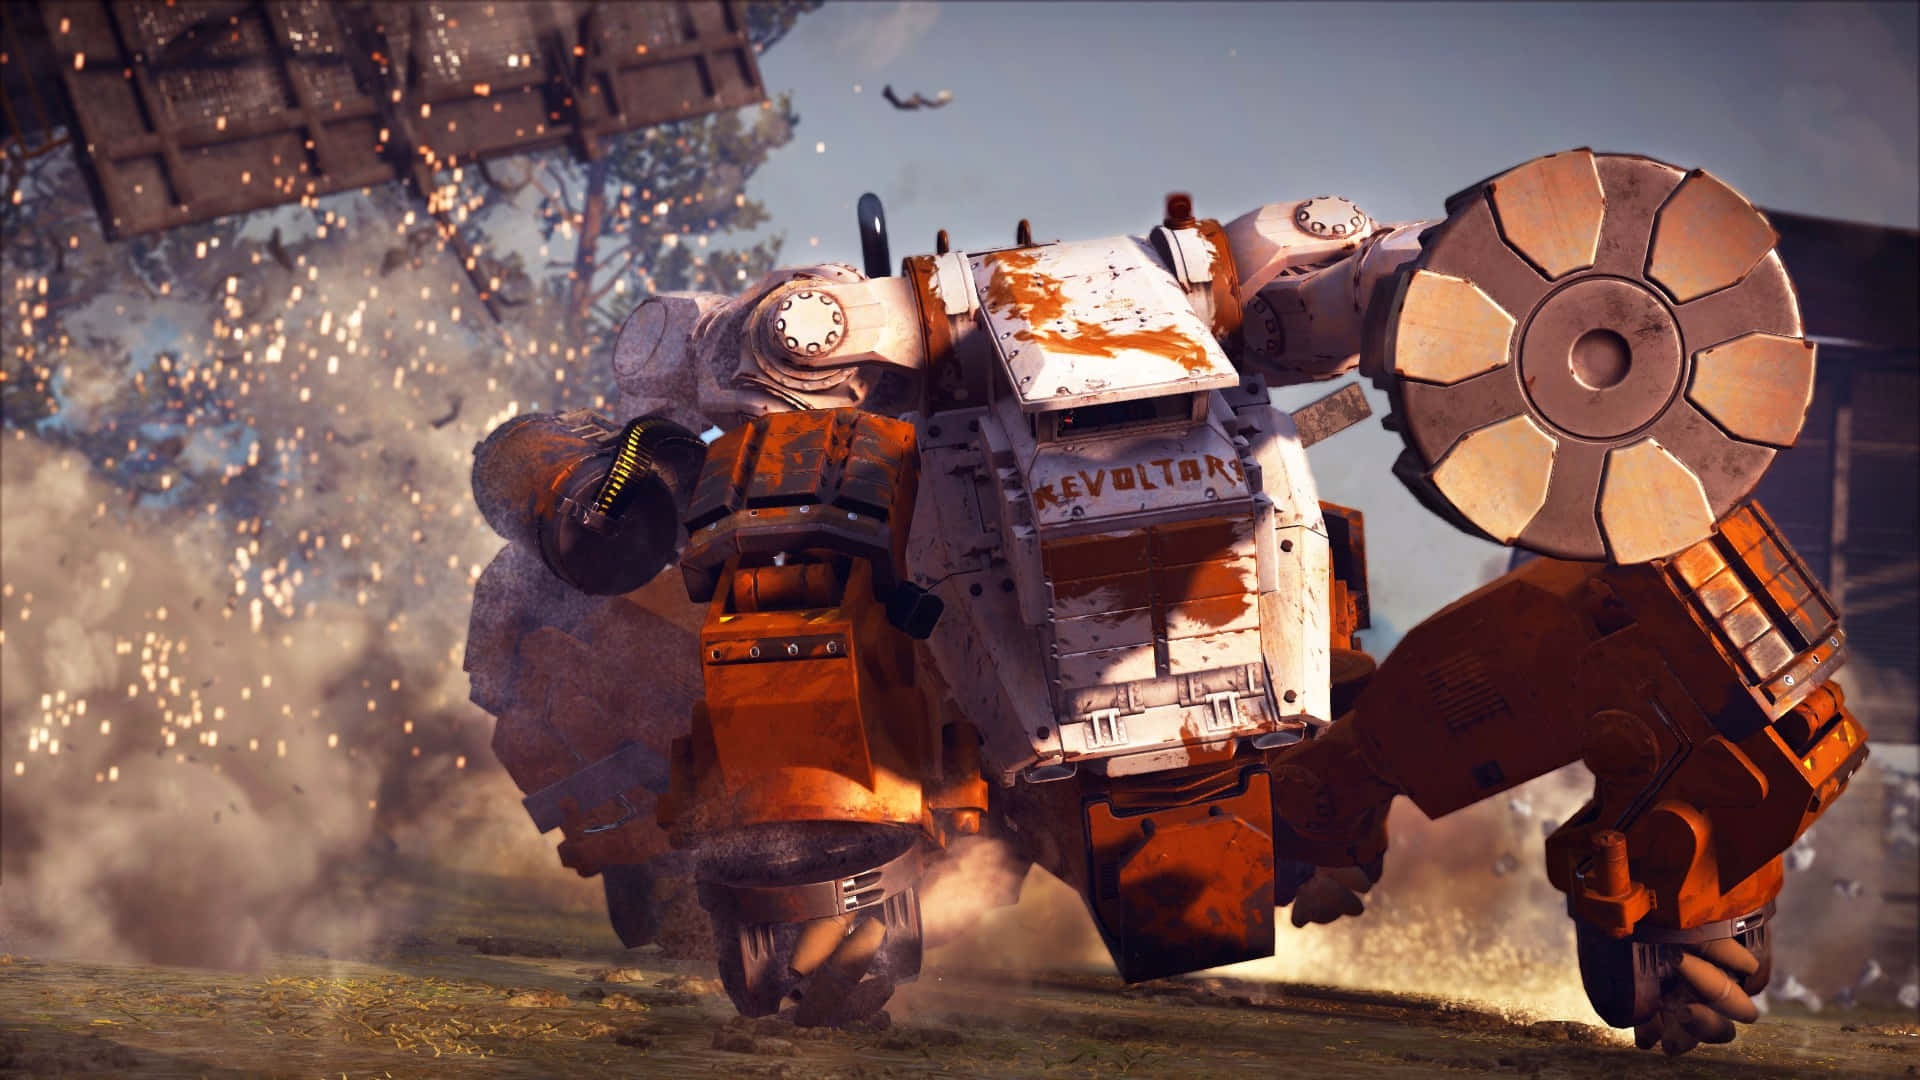 A Large Orange Robot Is Fighting With A Large Orange Robot